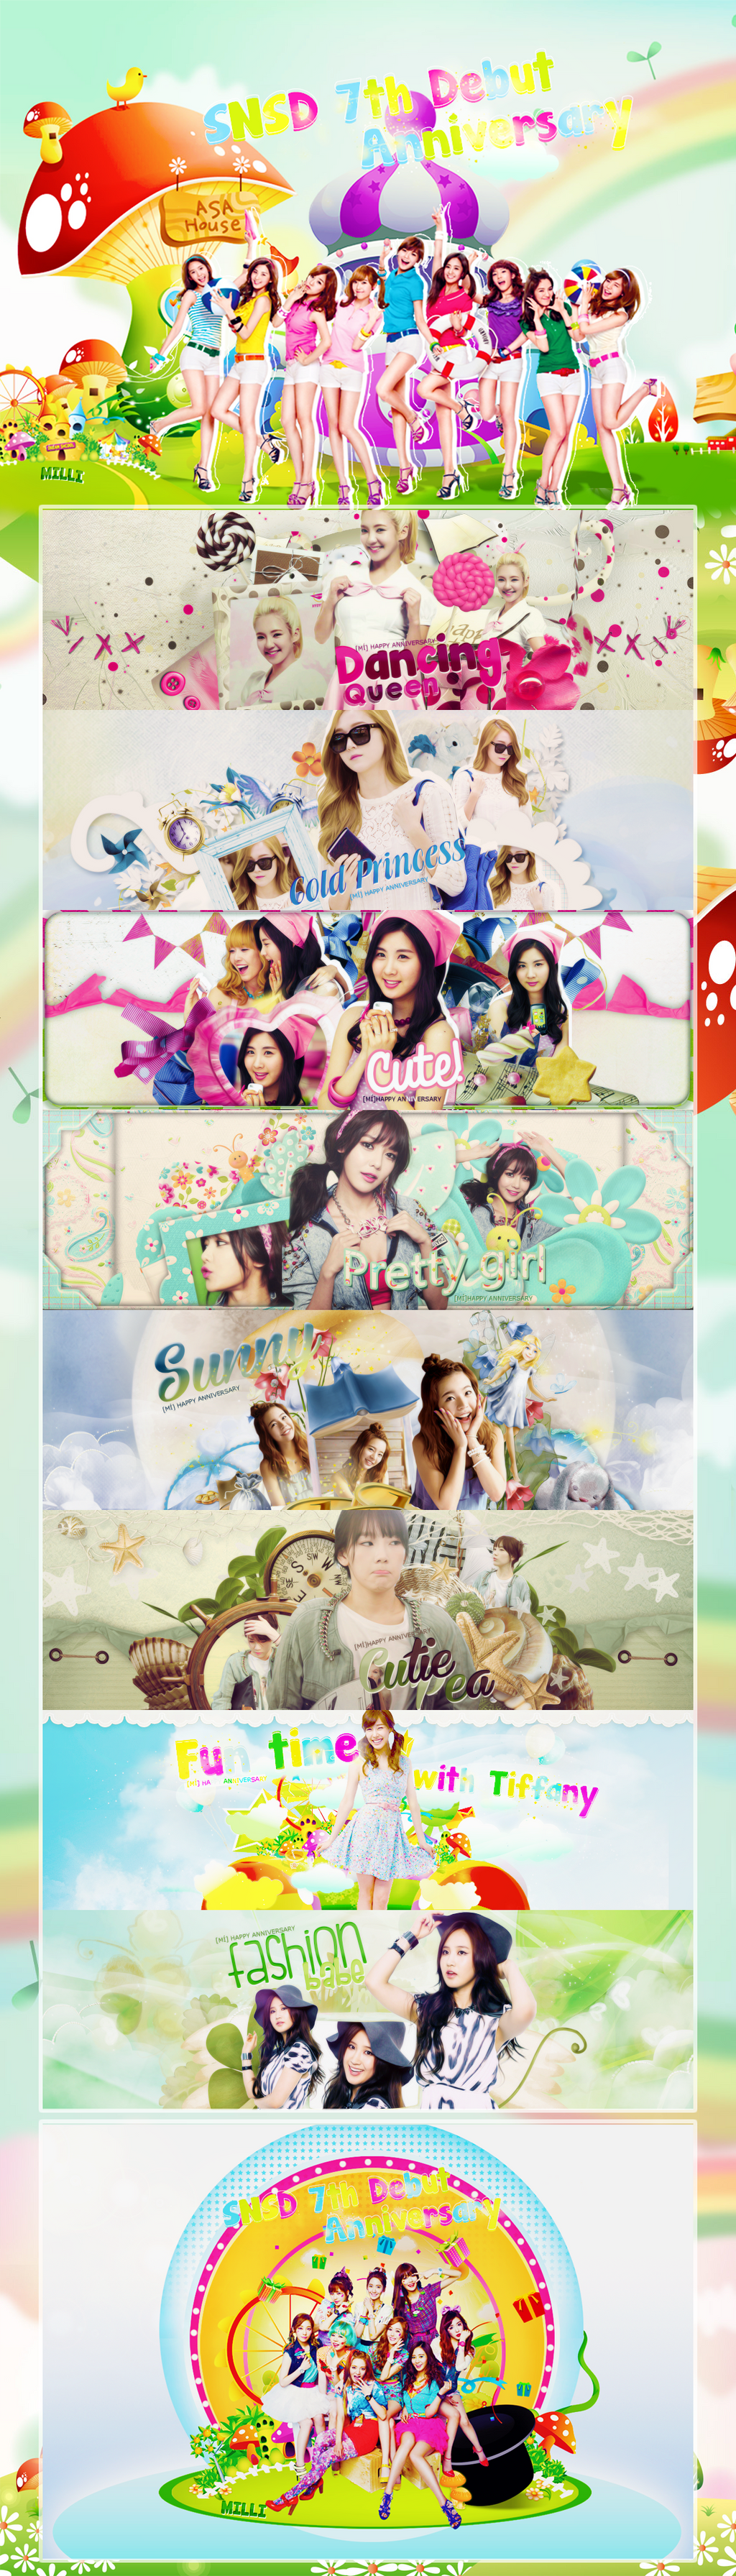 [MegaPSD] Happy SNSD 7th Debut Anniversary